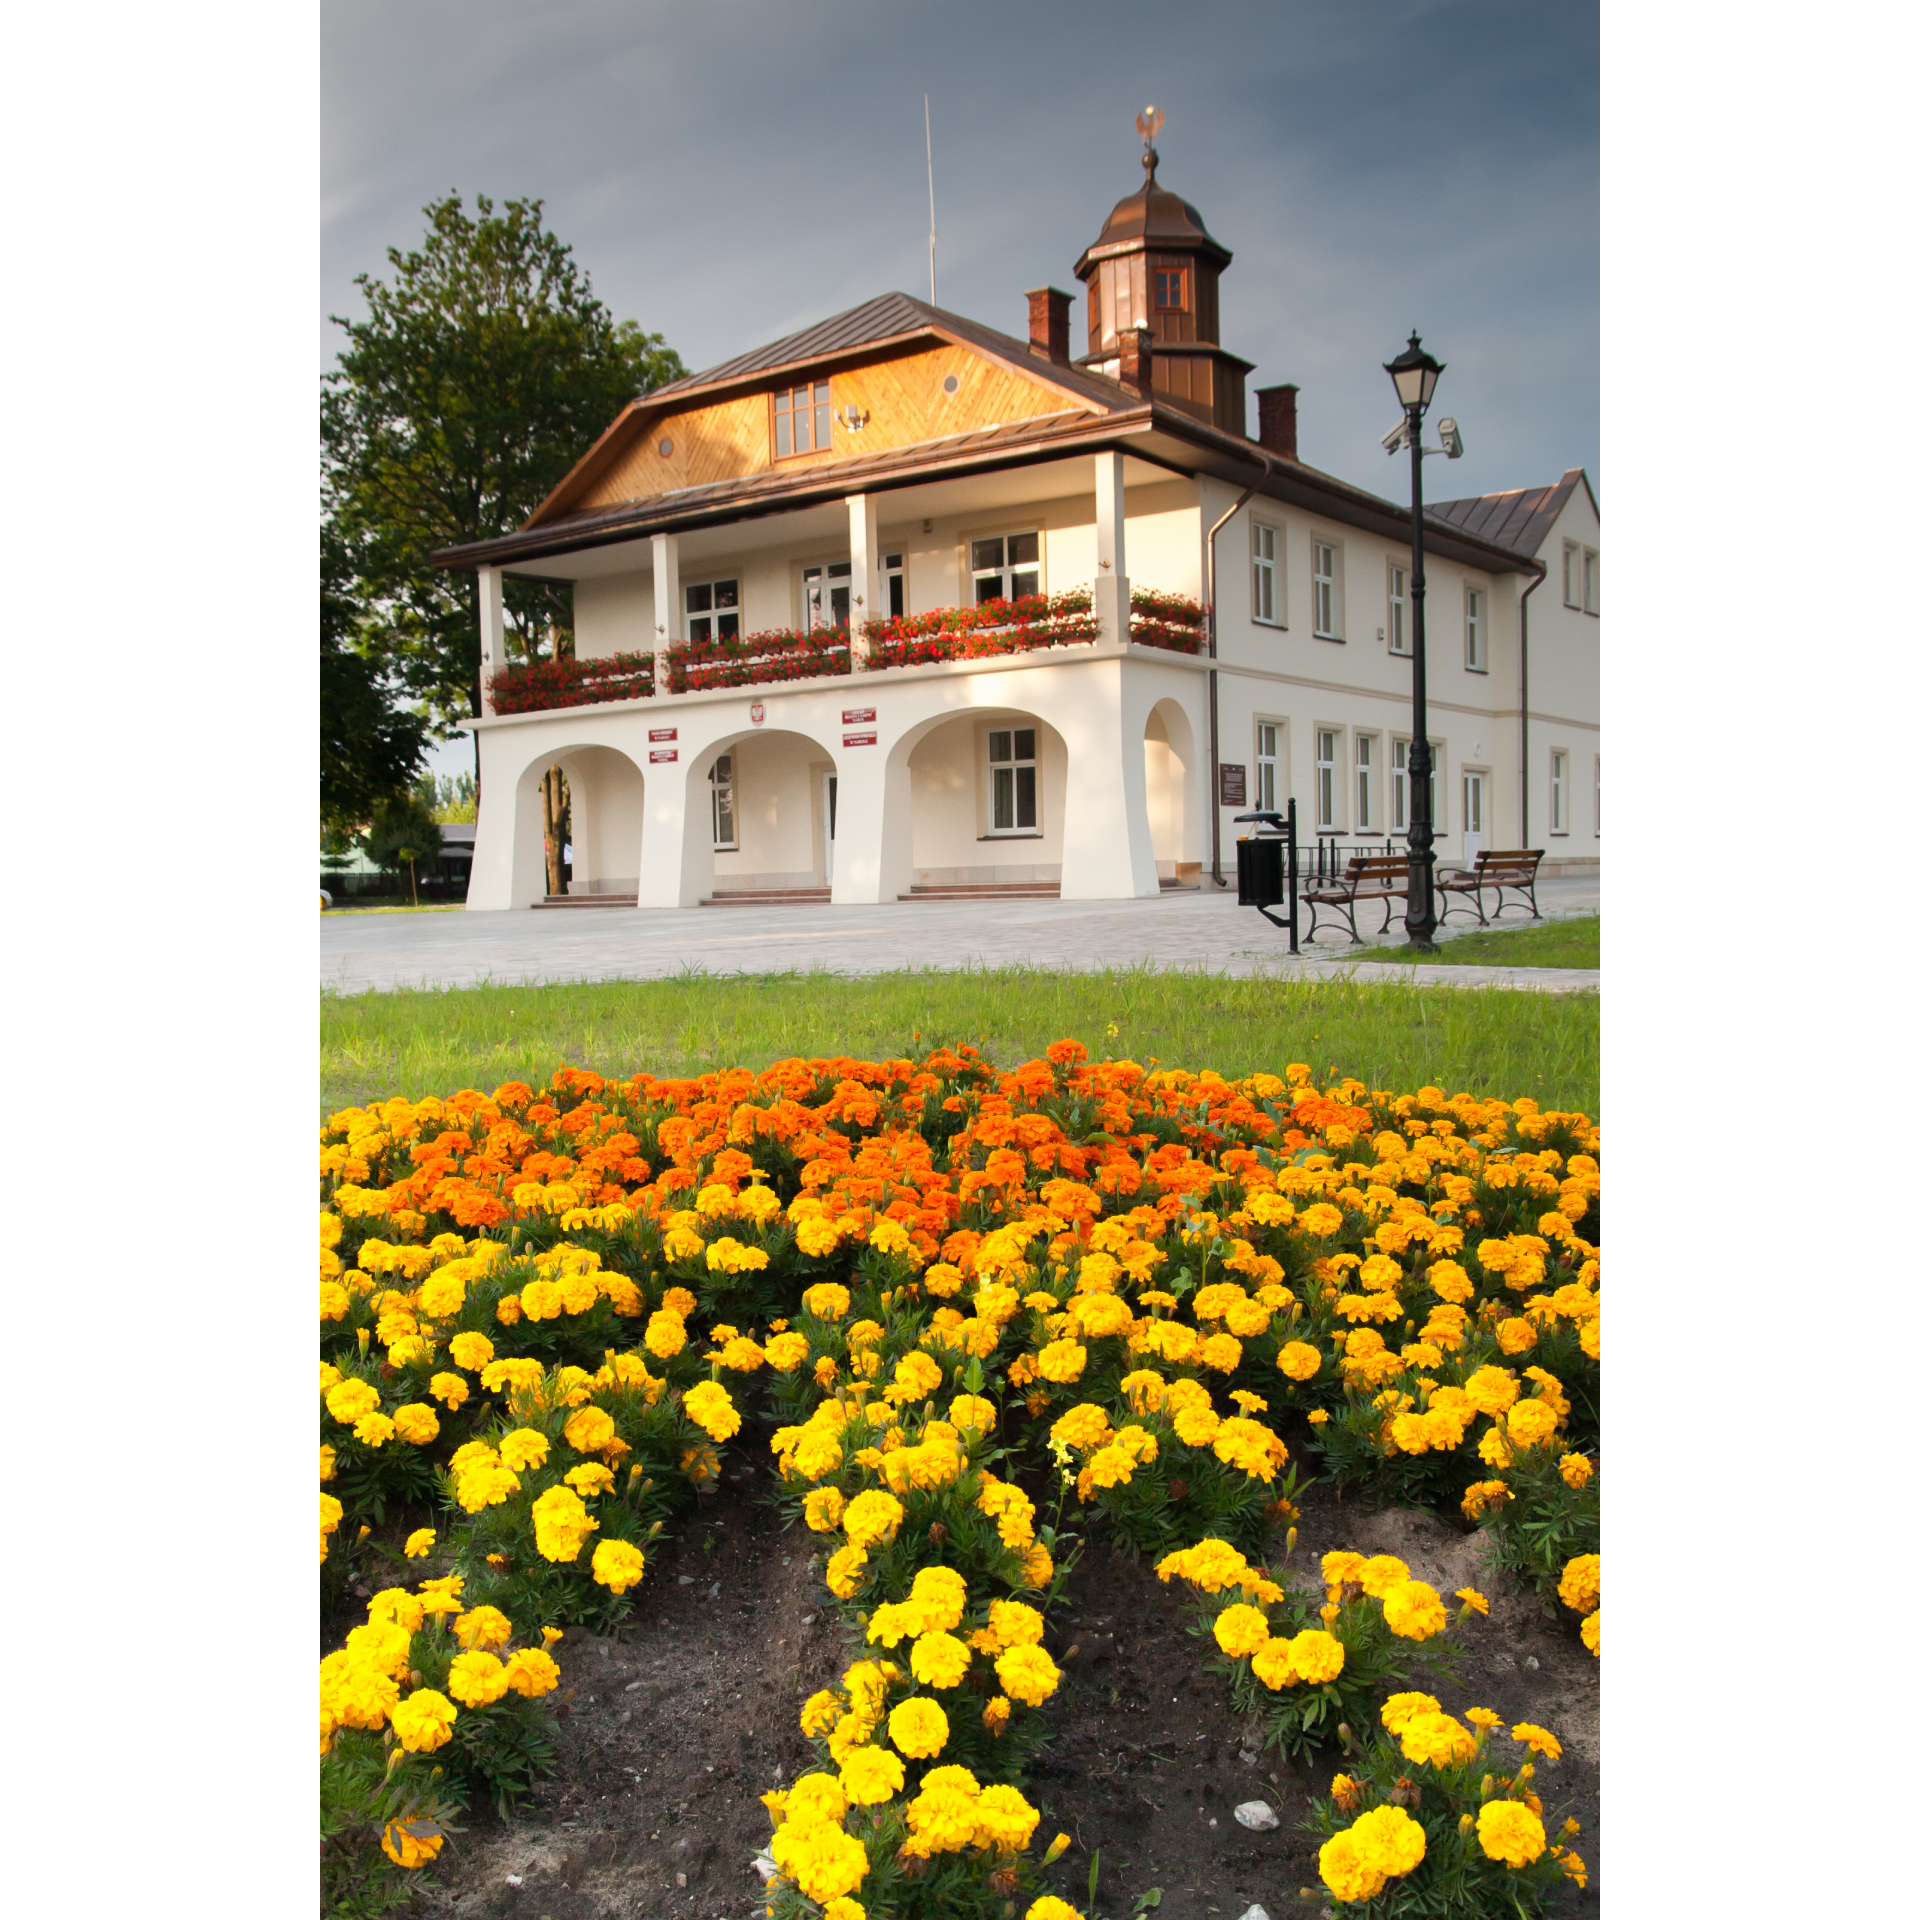 A bright building with arcades and an attic with a wooden finish, surrounded by yellow and orange flowers